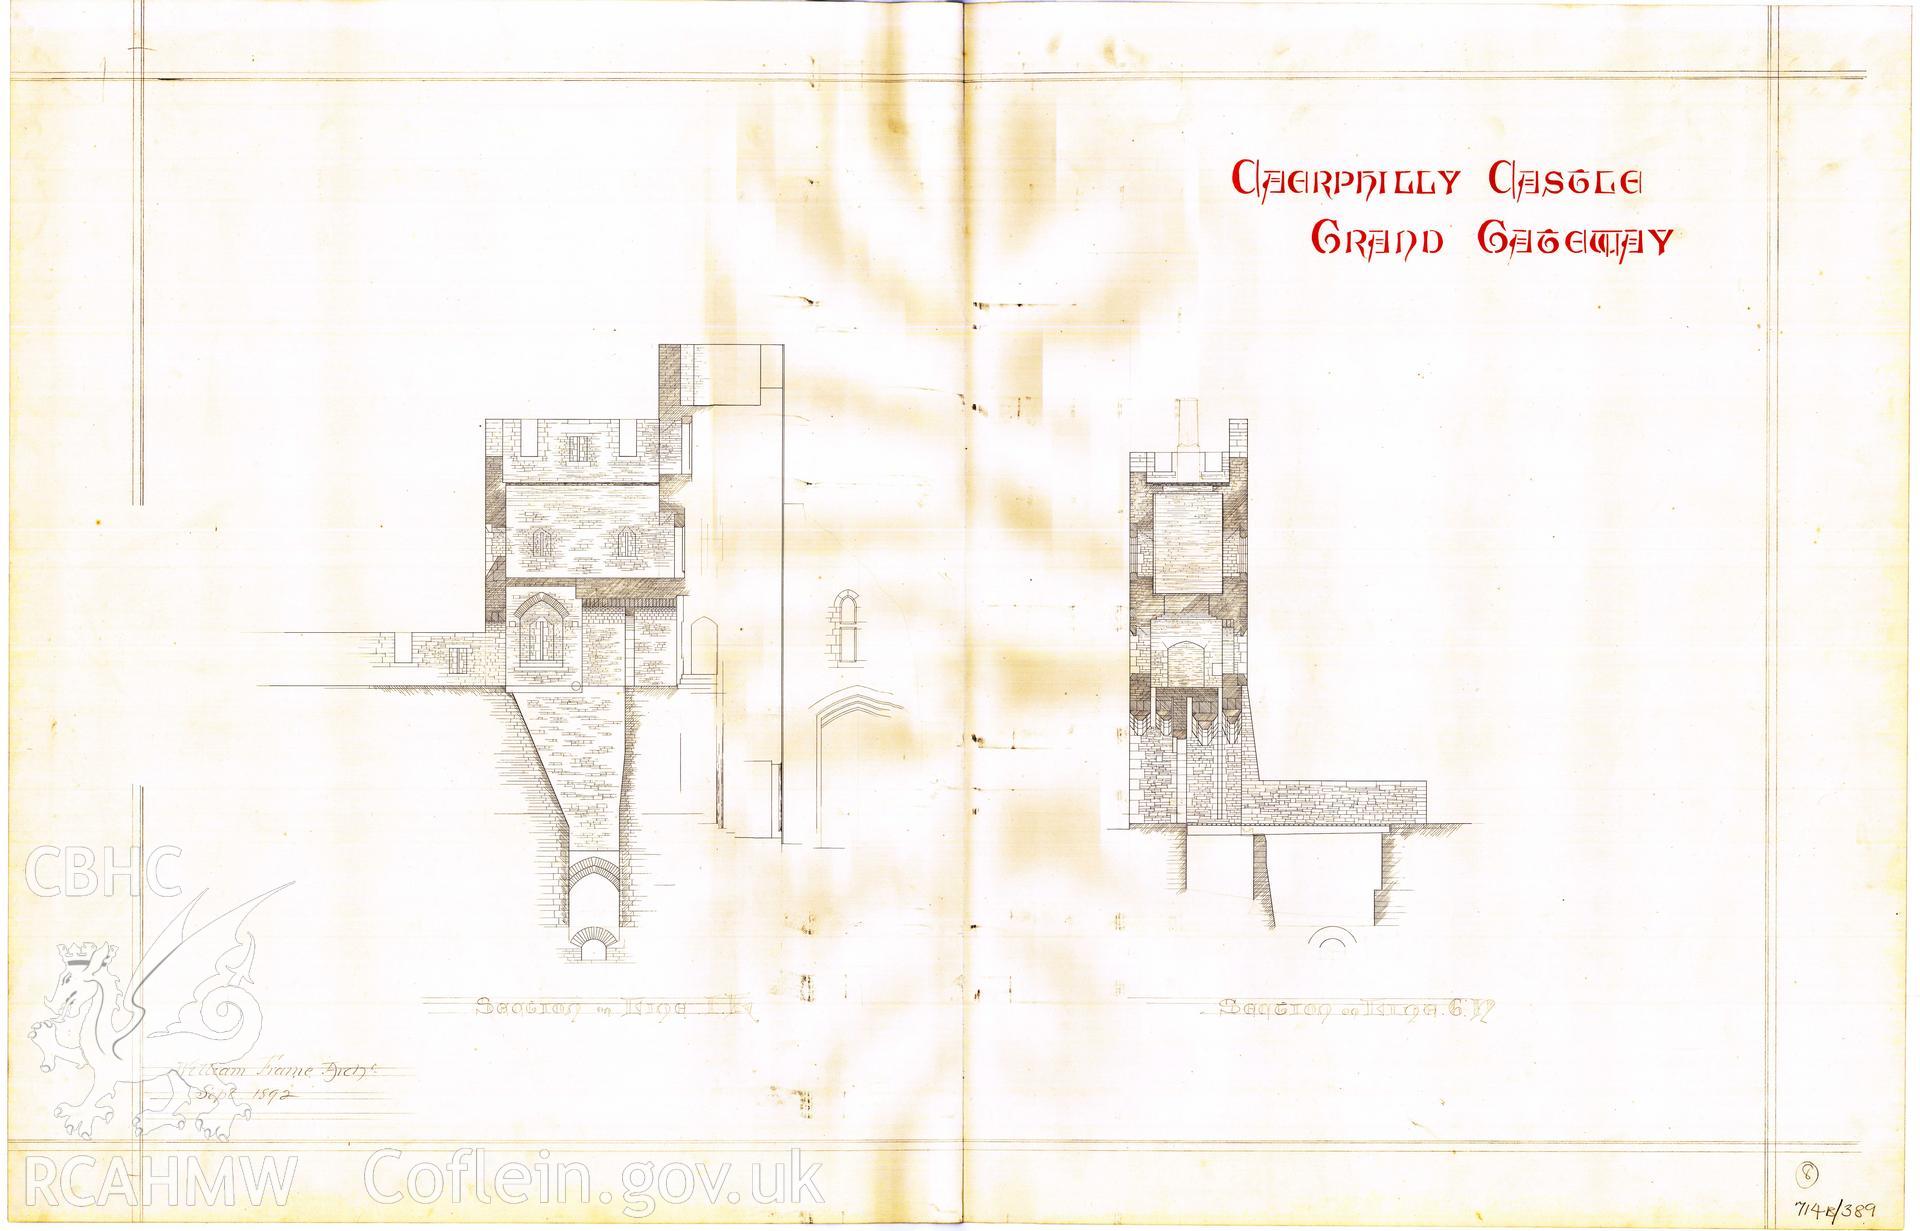 Cadw guardianship monument drawing of Caerphilly Castle. Grand Gateway. Cadw Ref. No:714B/389. Scale 1:96.